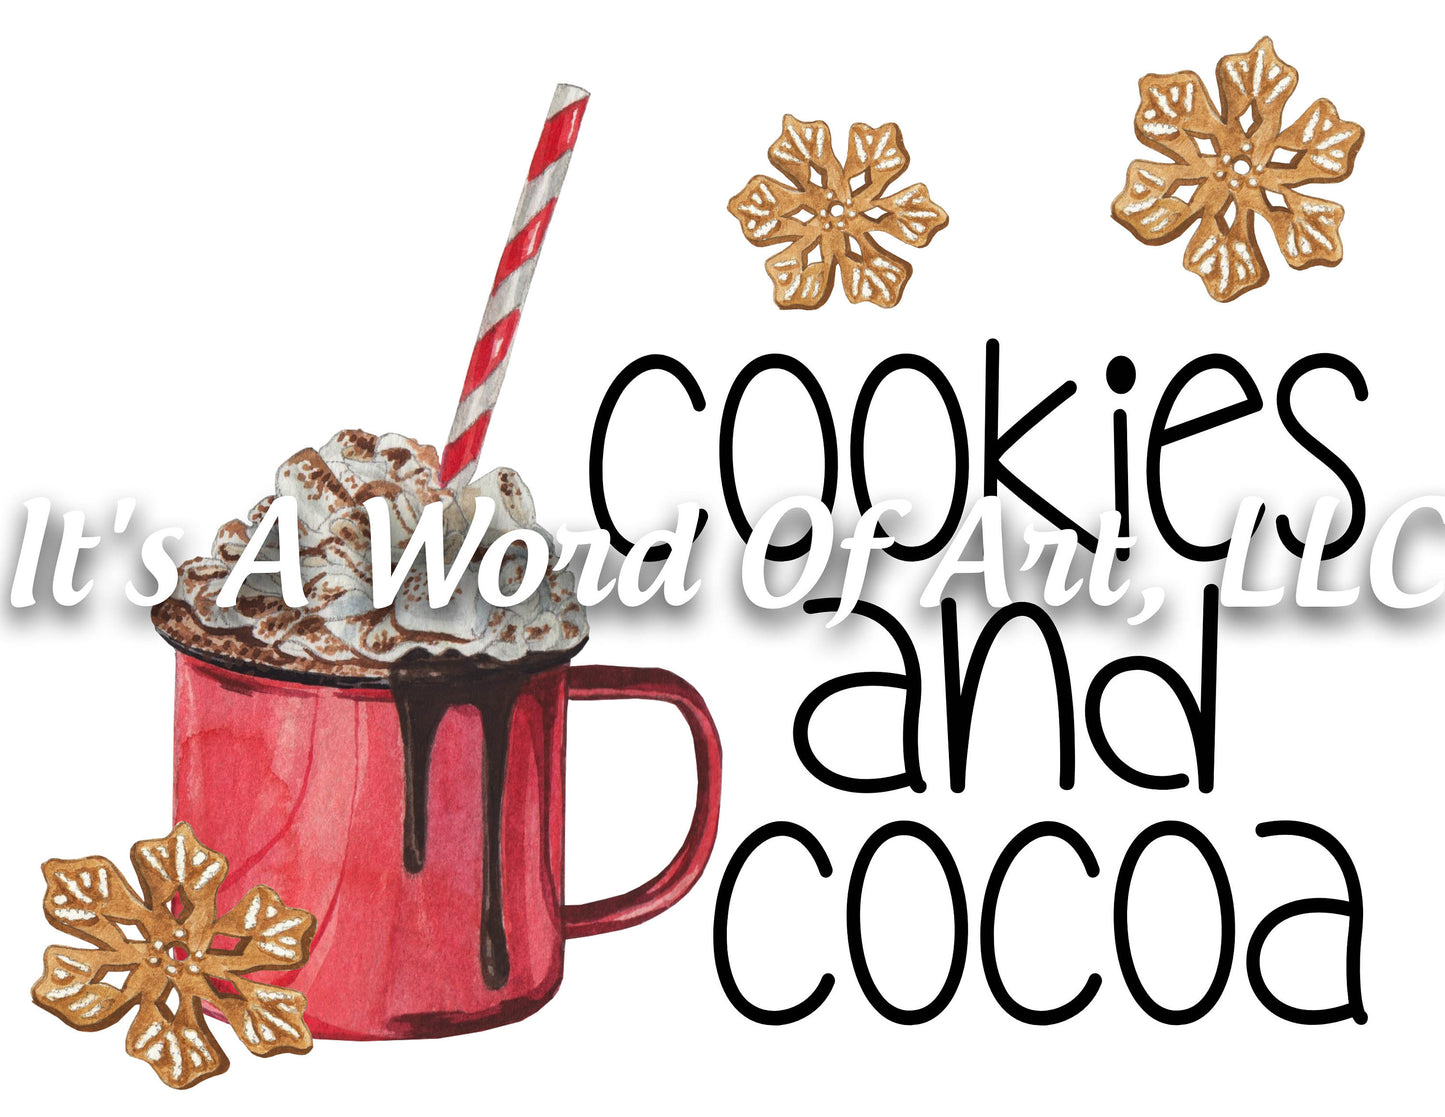 Christmas 302 - Cookies and Cocoa Hot Chocolate - Sublimation Transfer Set/Ready To Press Sublimation Transfer/Sublimation Transfer